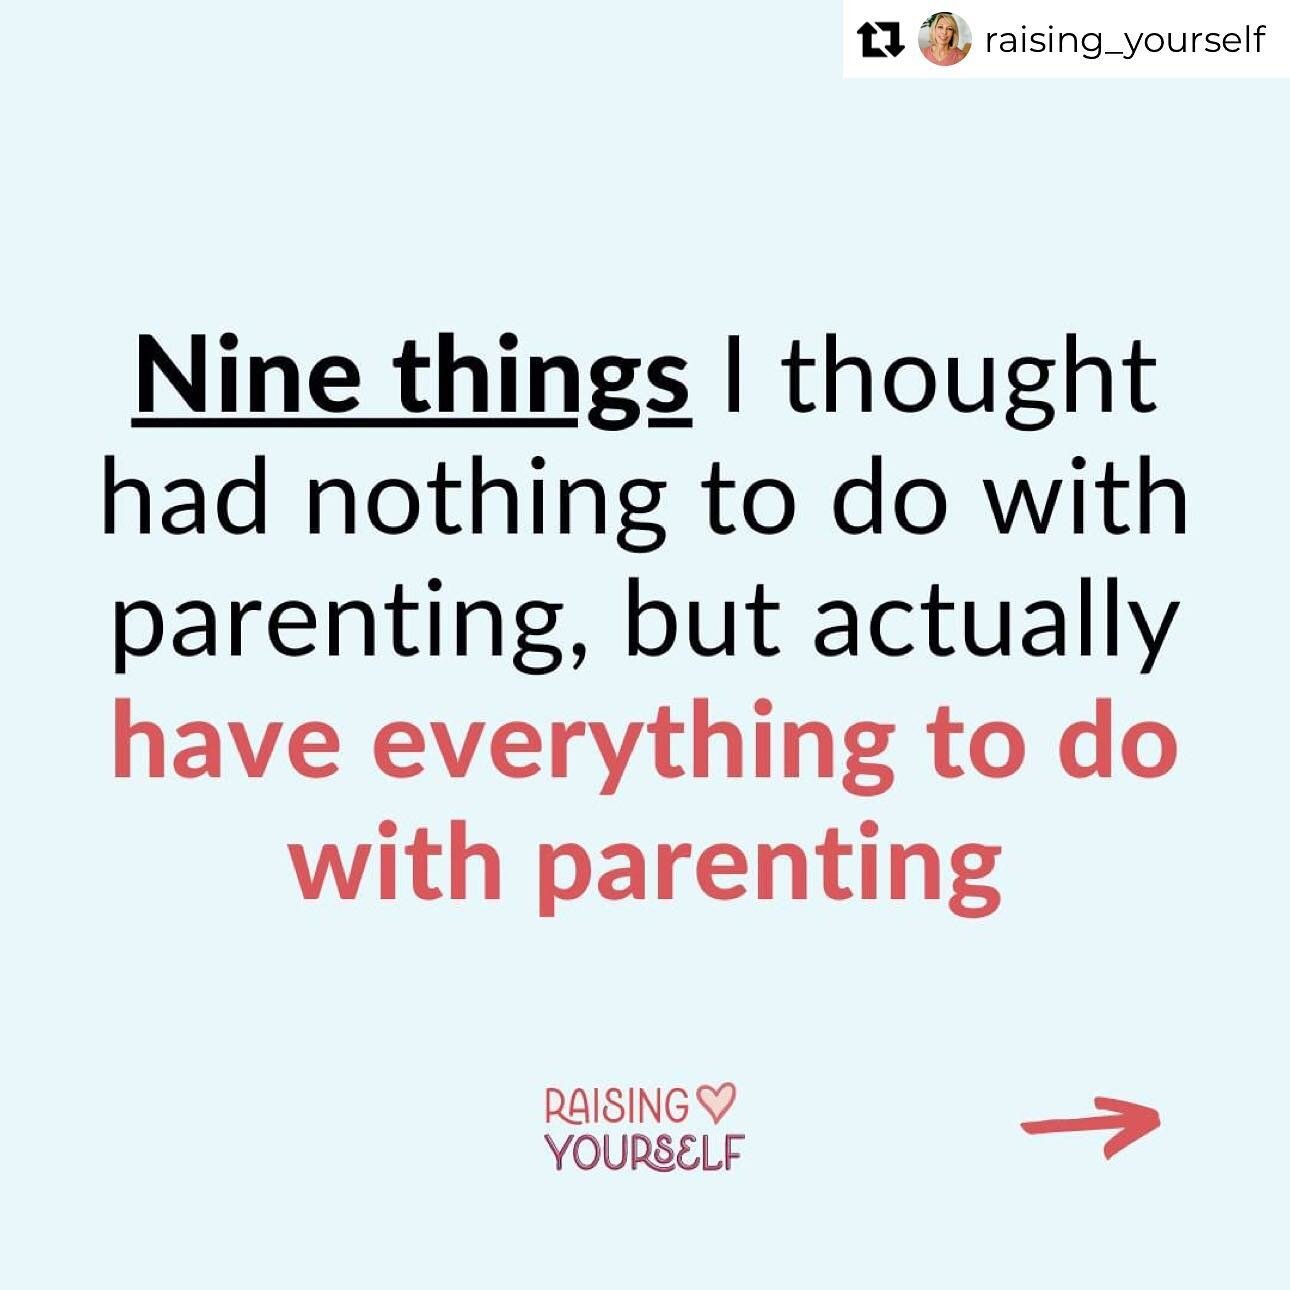 ✨✨✨✨✨✨✨✨✨✨ Repost from @raising_yourself
&bull;
My 11yo son is really into Ninja Warrior and is always looking for ways to scale a higher wall and jump over a more daring obstacle. Personally, I am a very risk-adverse, anti-adventure human being 😆 s